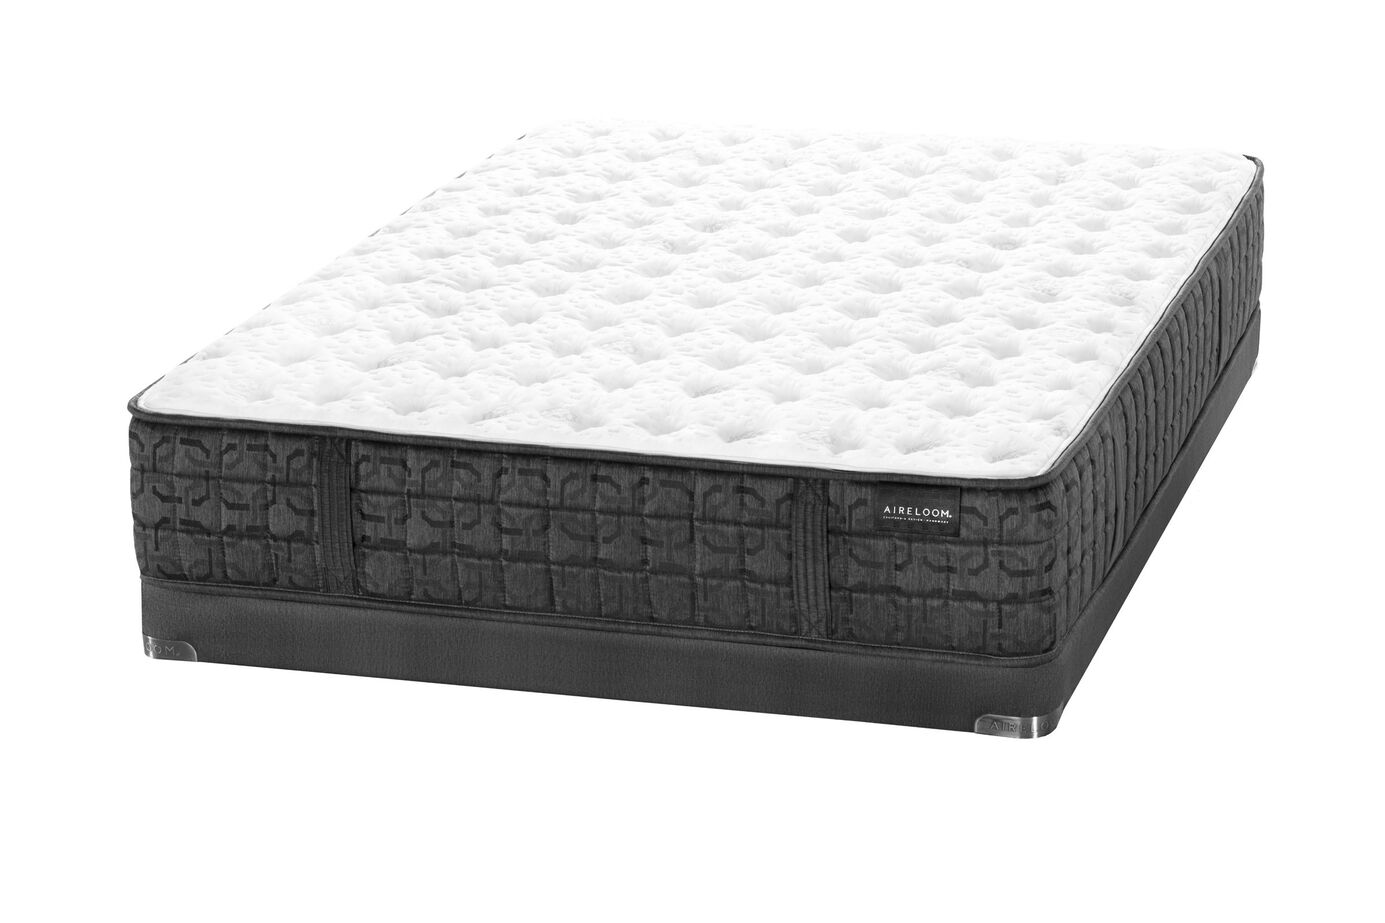 Aireloom Pacific Bay Orion Luxury Firm Mattress 12.5" image number 4